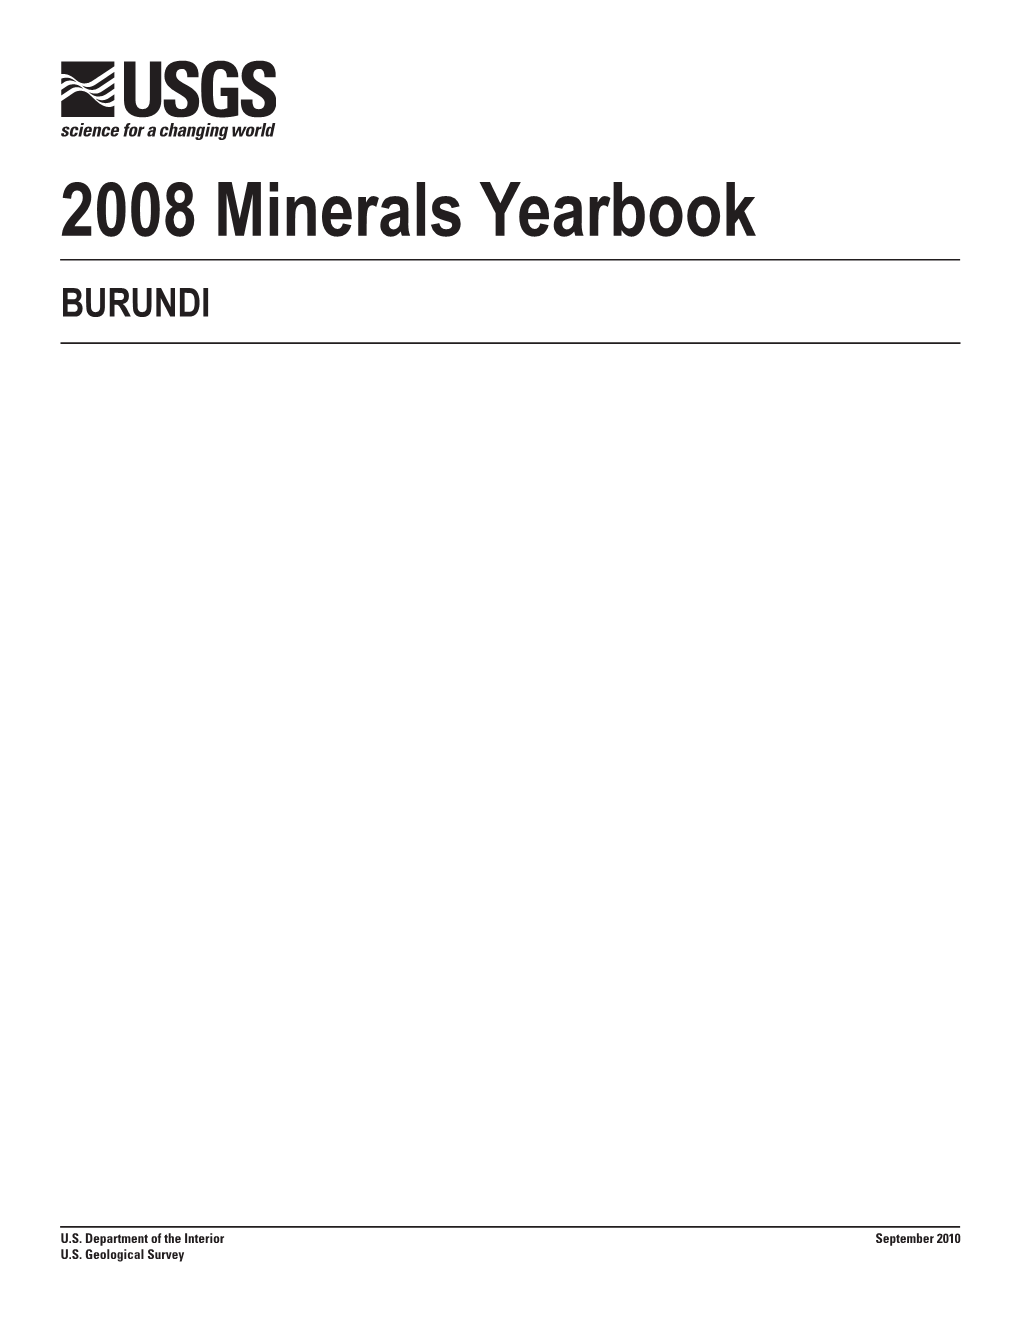 The Mineral Industry of Burundi in 2008